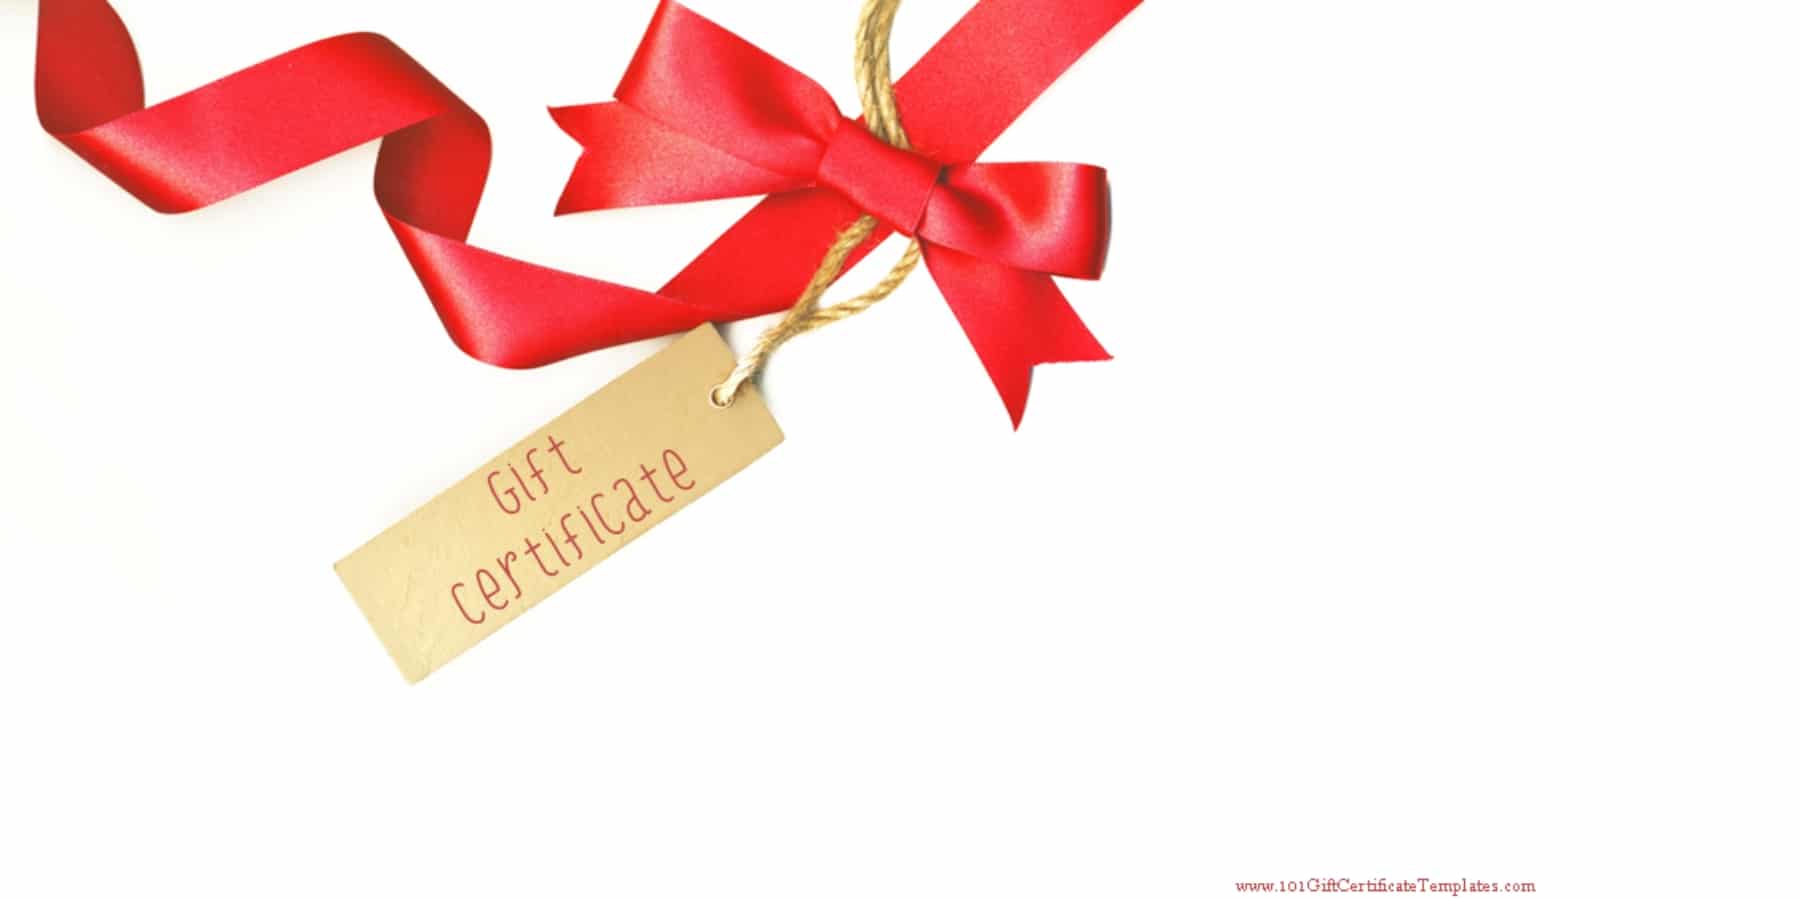 t-l-charger-gratuit-homemade-gift-certificate-template